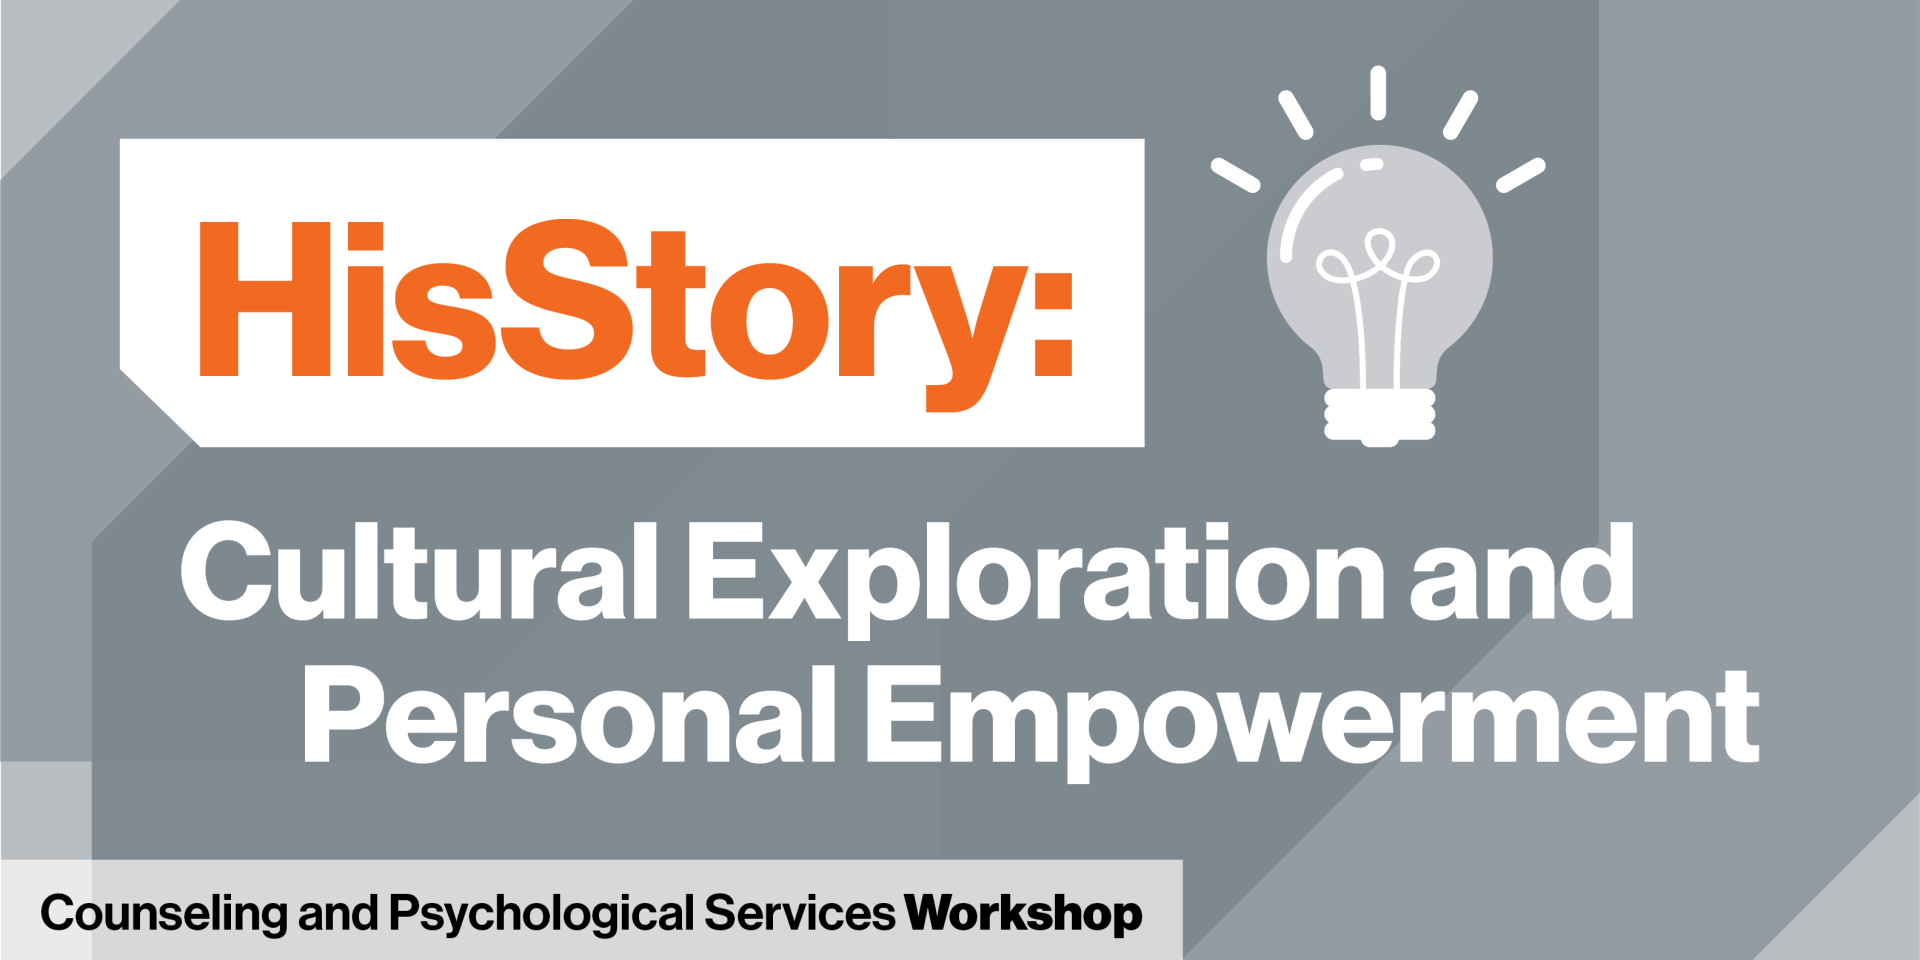 HisStory: Cultural Exploration and Personal Empowerment